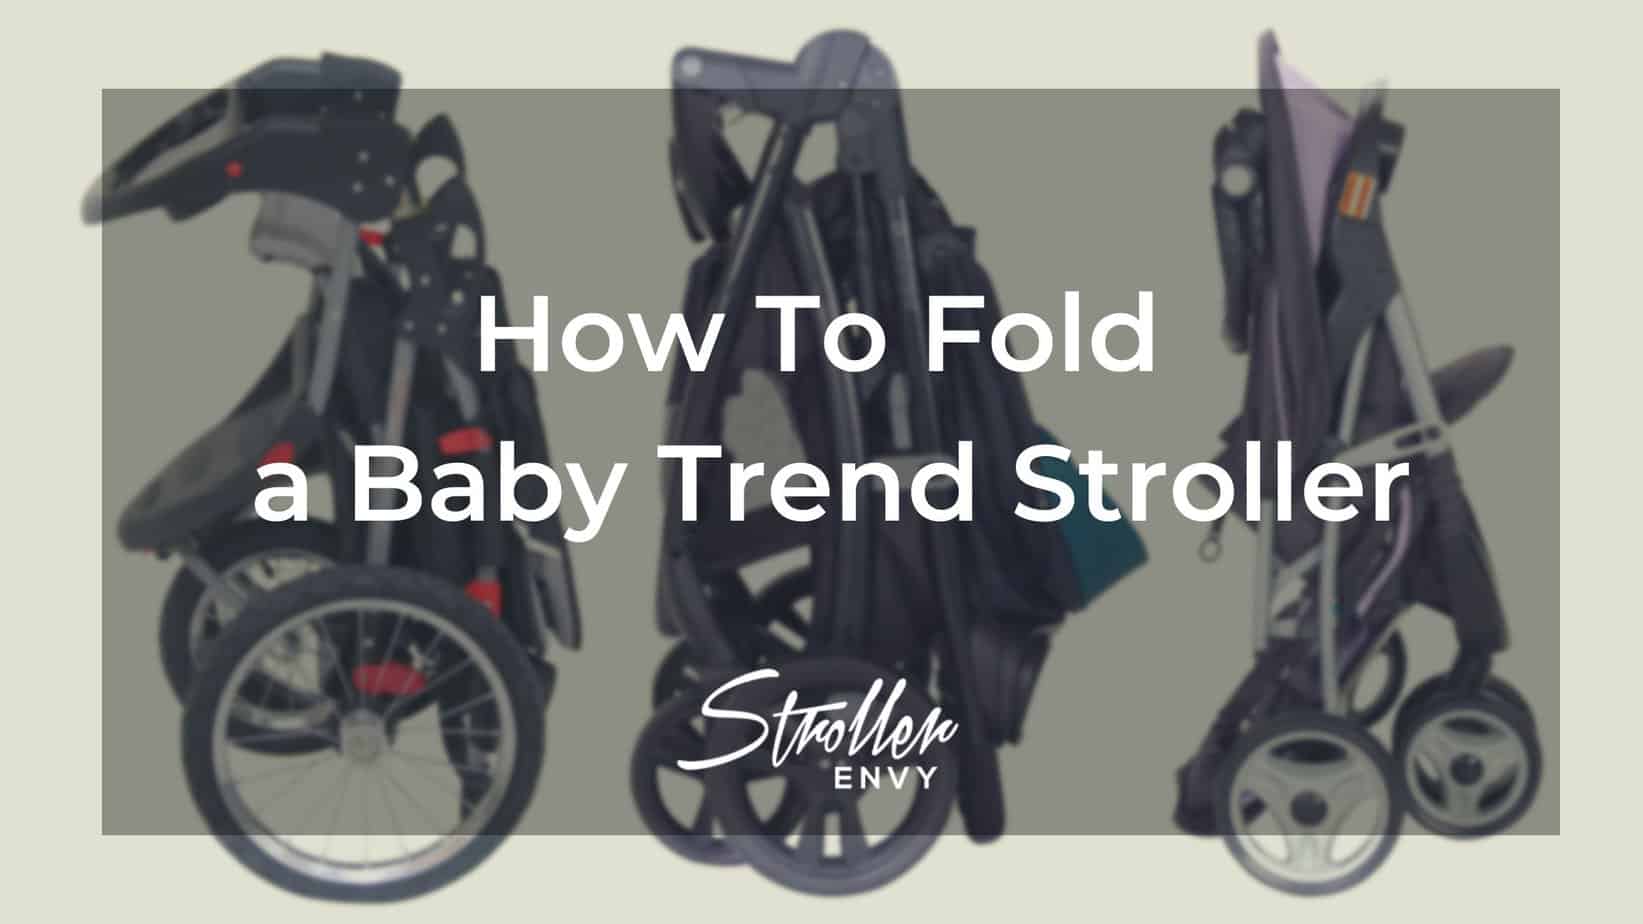 How To Fold a Baby Trend Stroller